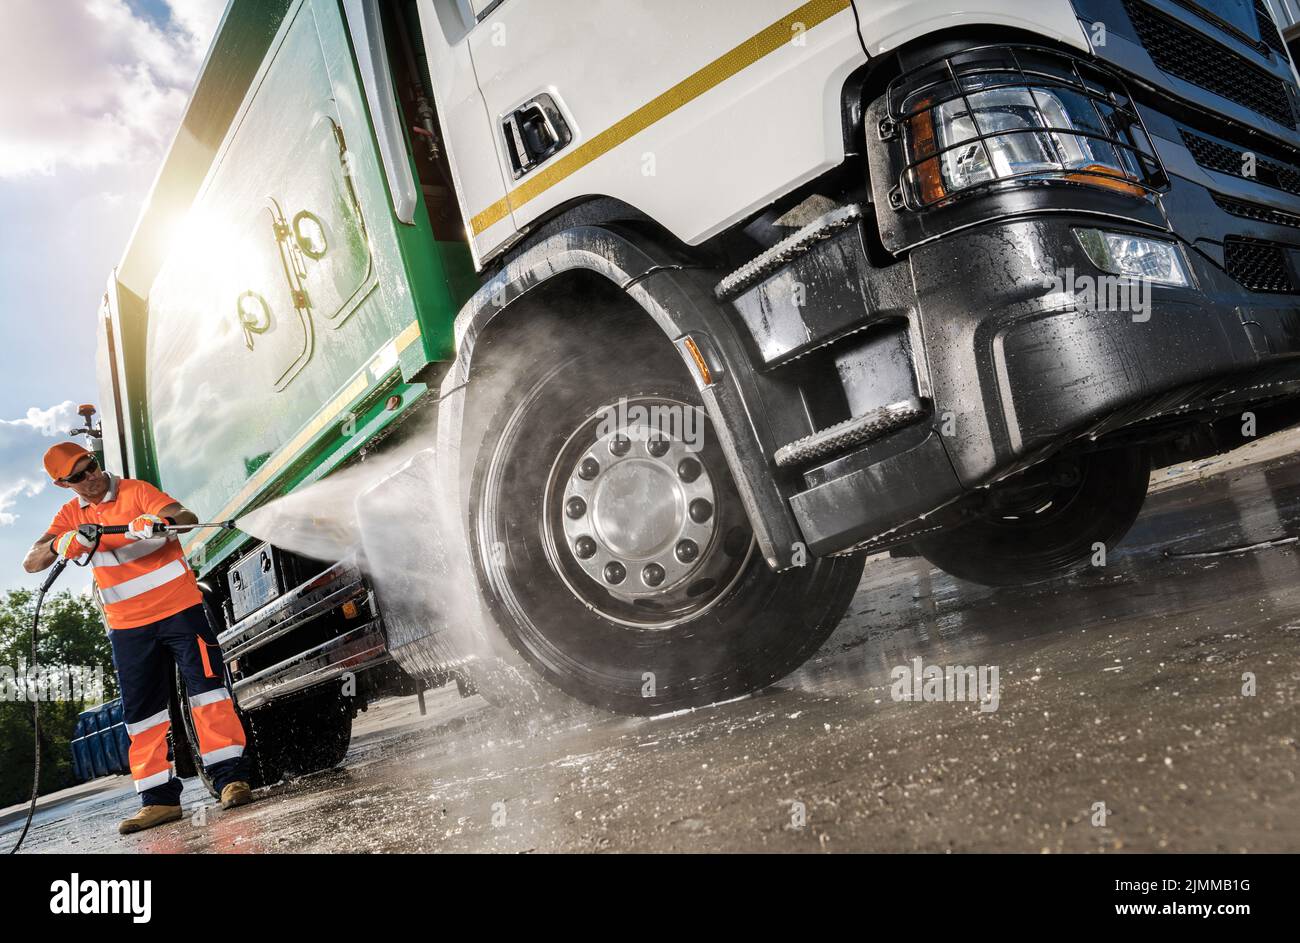 Heavy Equipment Washing Station Worker in His 40s Pressure Wash a Garbage Truck Stock Photo